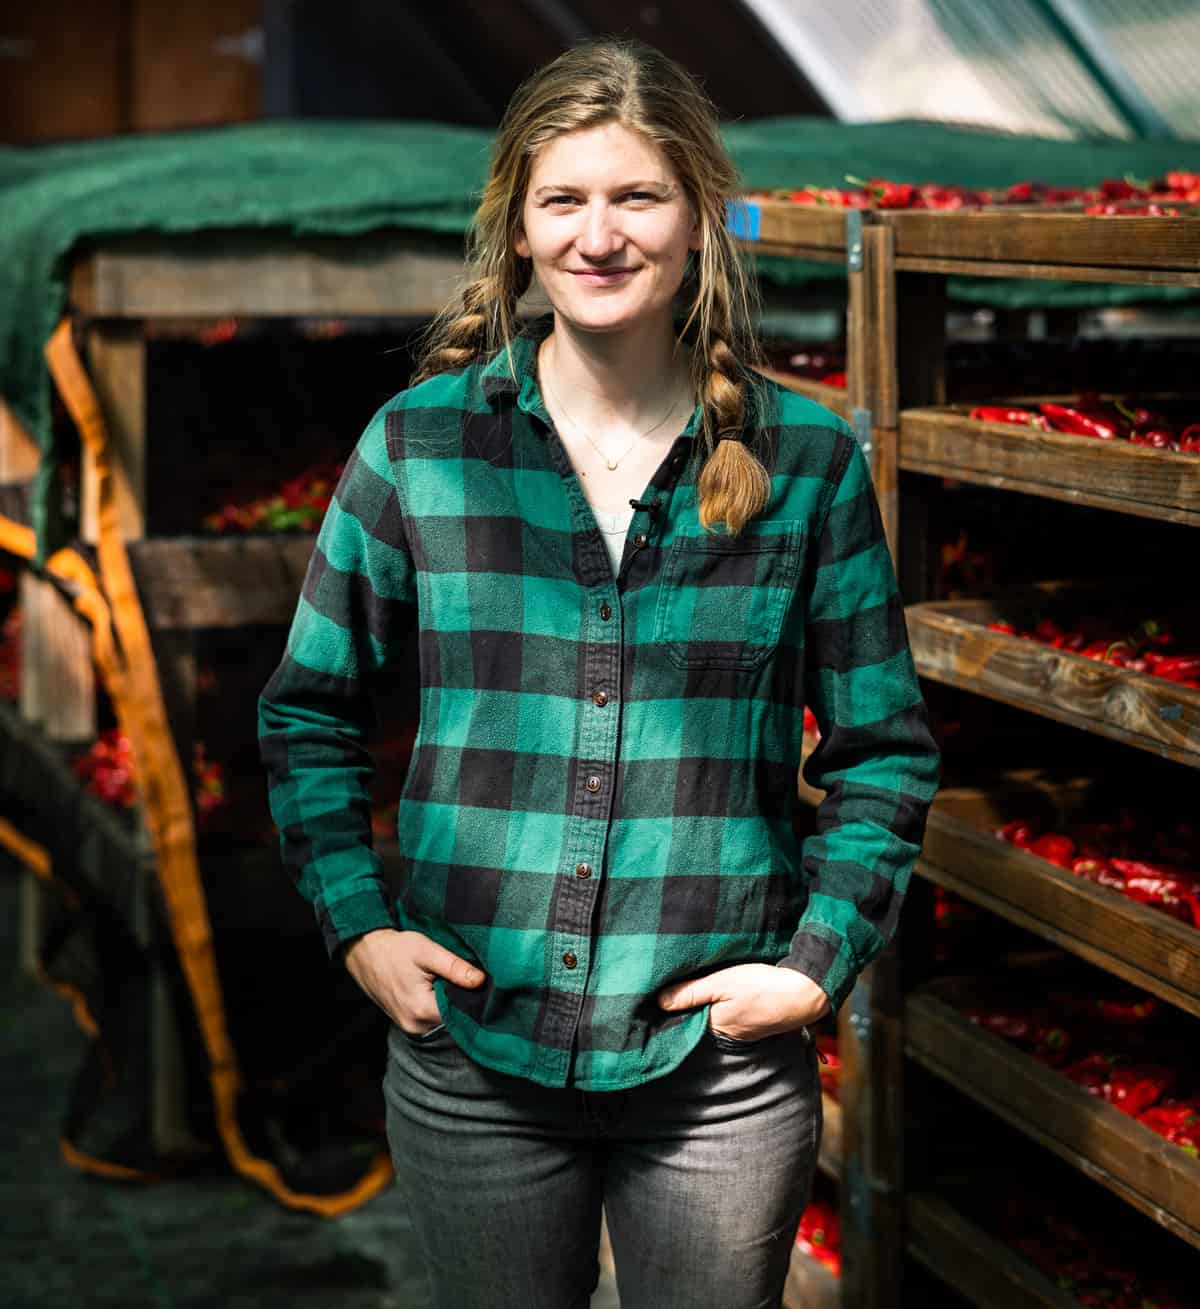 Meet a Farmer – Krissy Scommegna of Boonville Barn Collective